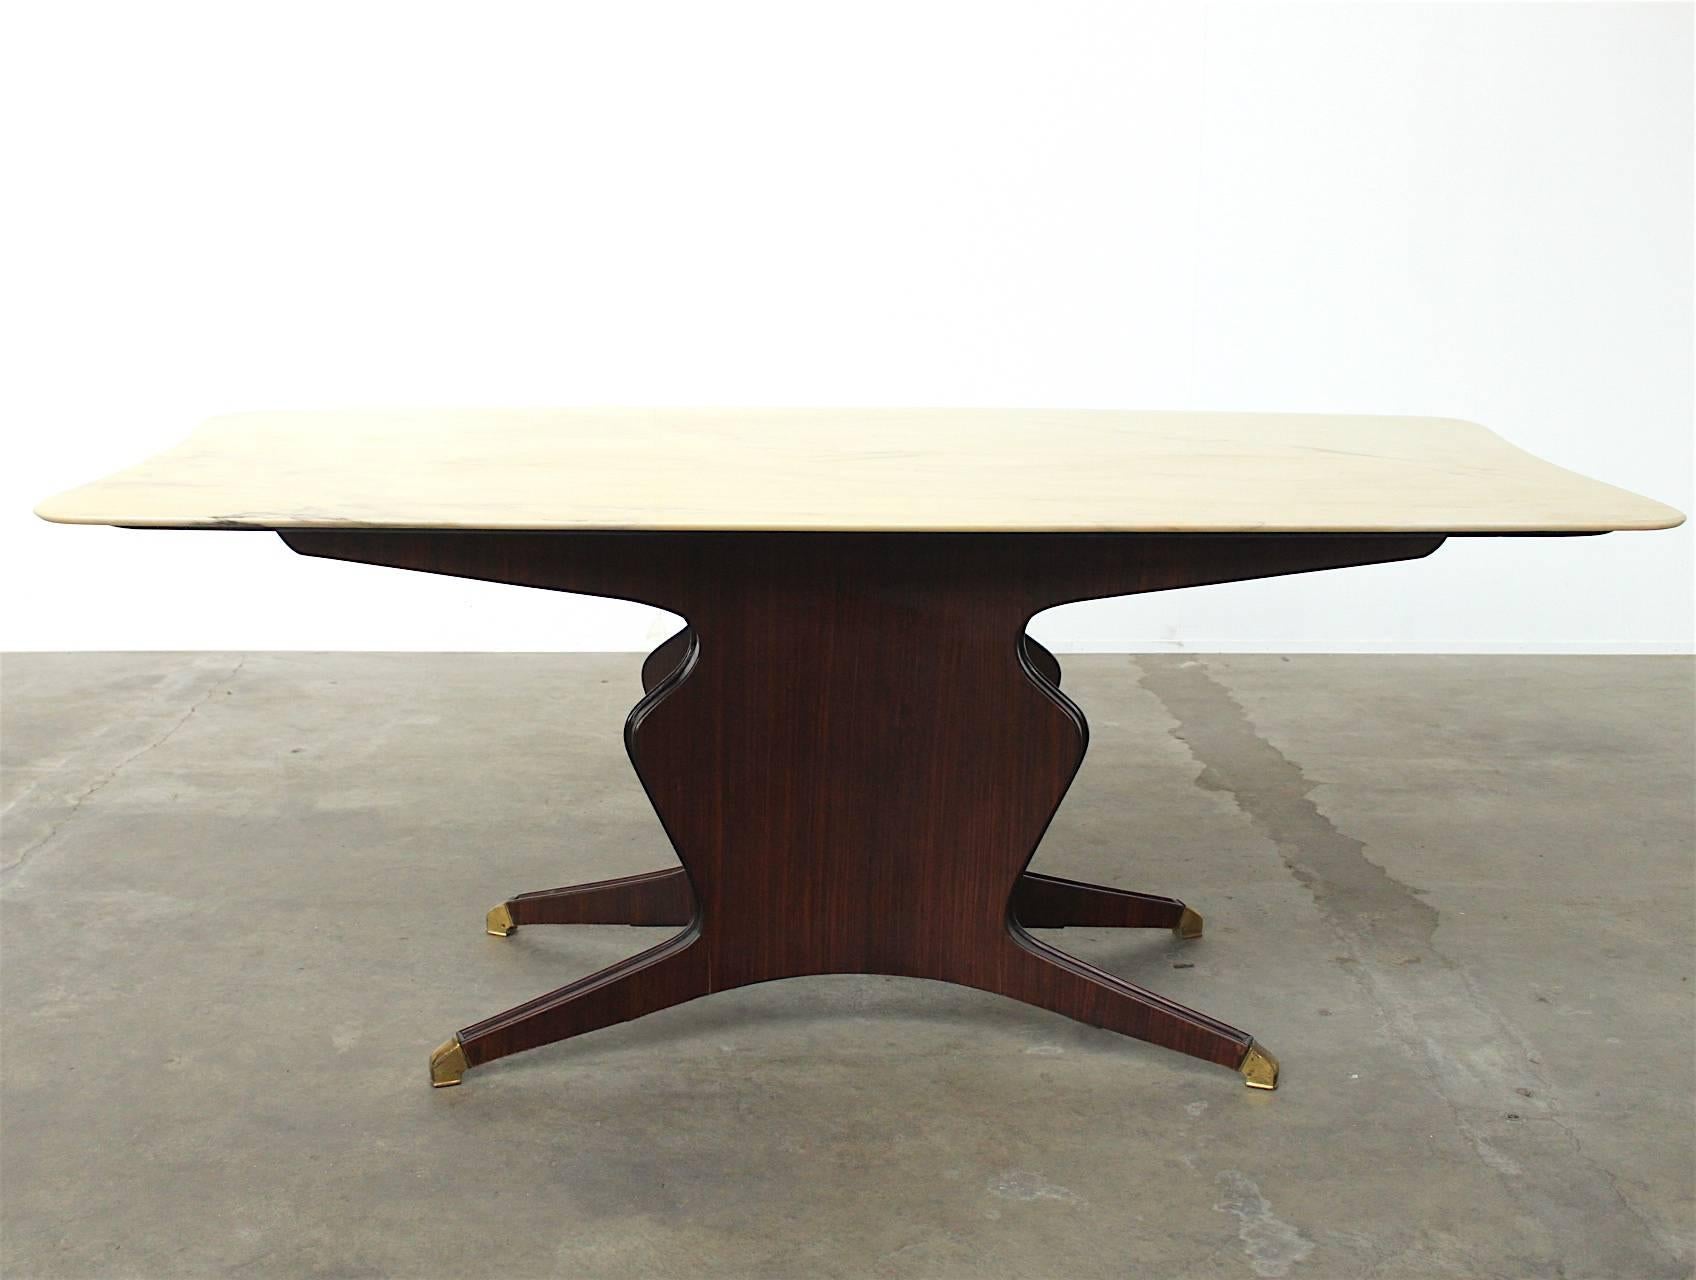 Stunning dining table for eight in the style Osvaldo Borsani with a beautiful organically shaped pedestal finished with copper leg tips and a multi coloured veined onyx tabletop.
This is a truly master crafted piece, notice the distinctive shape of